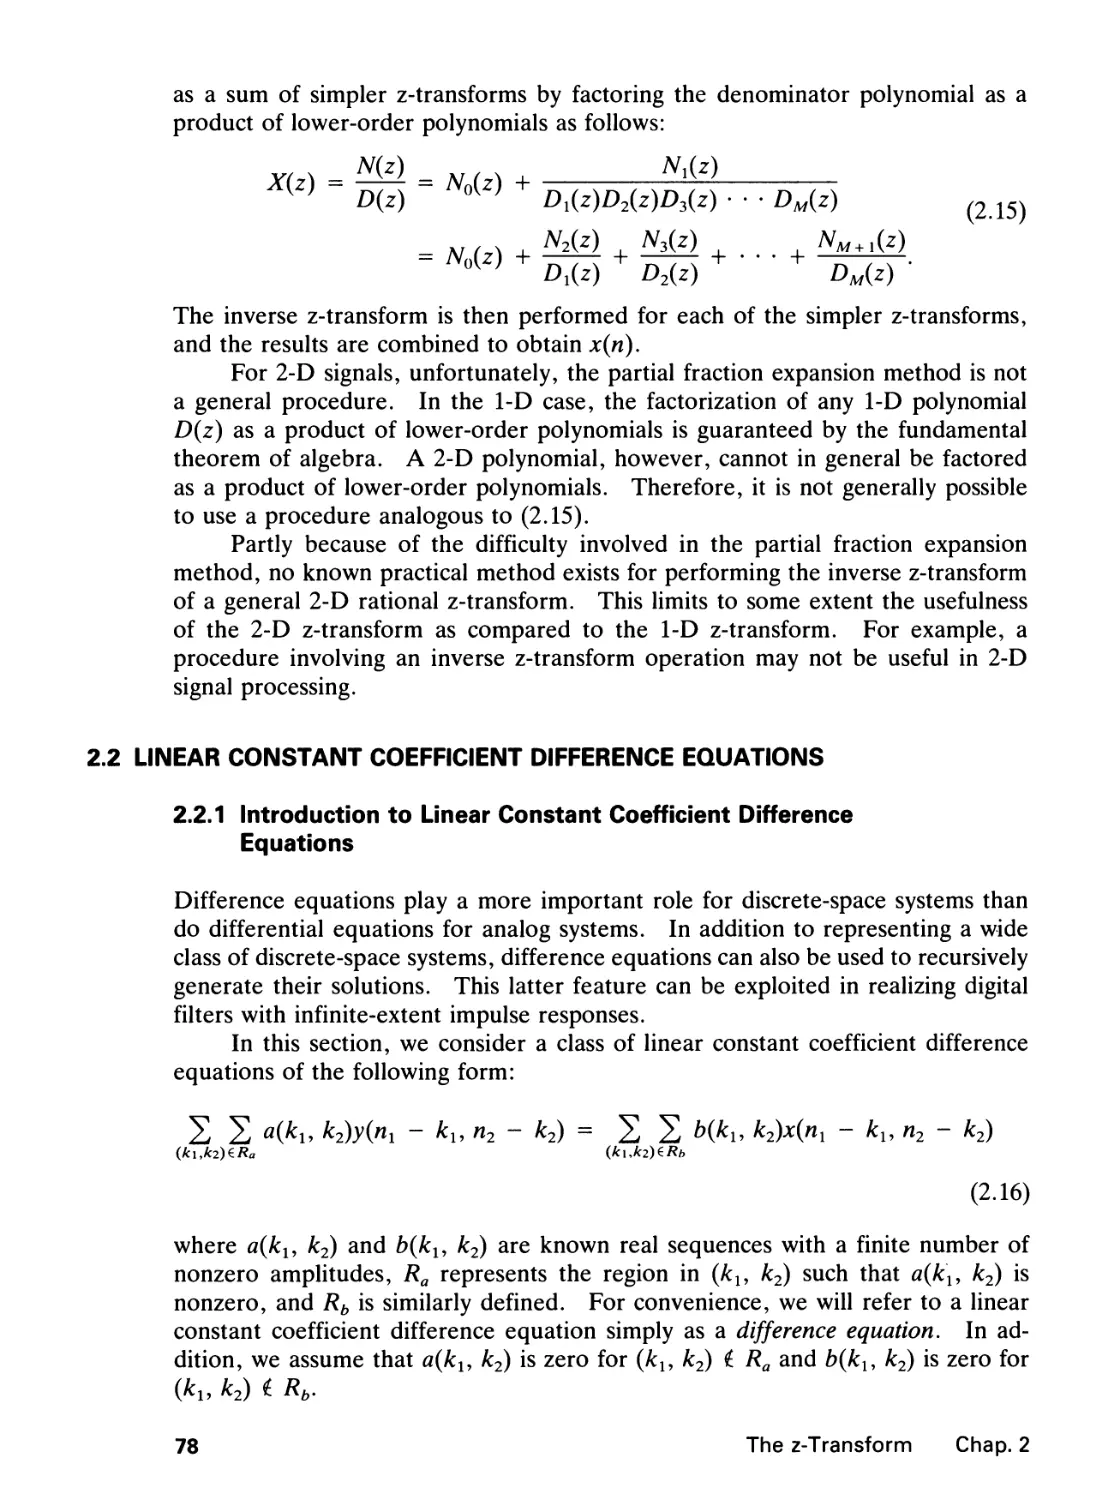 2.2 Linear Constant Coefficient Difference Equations